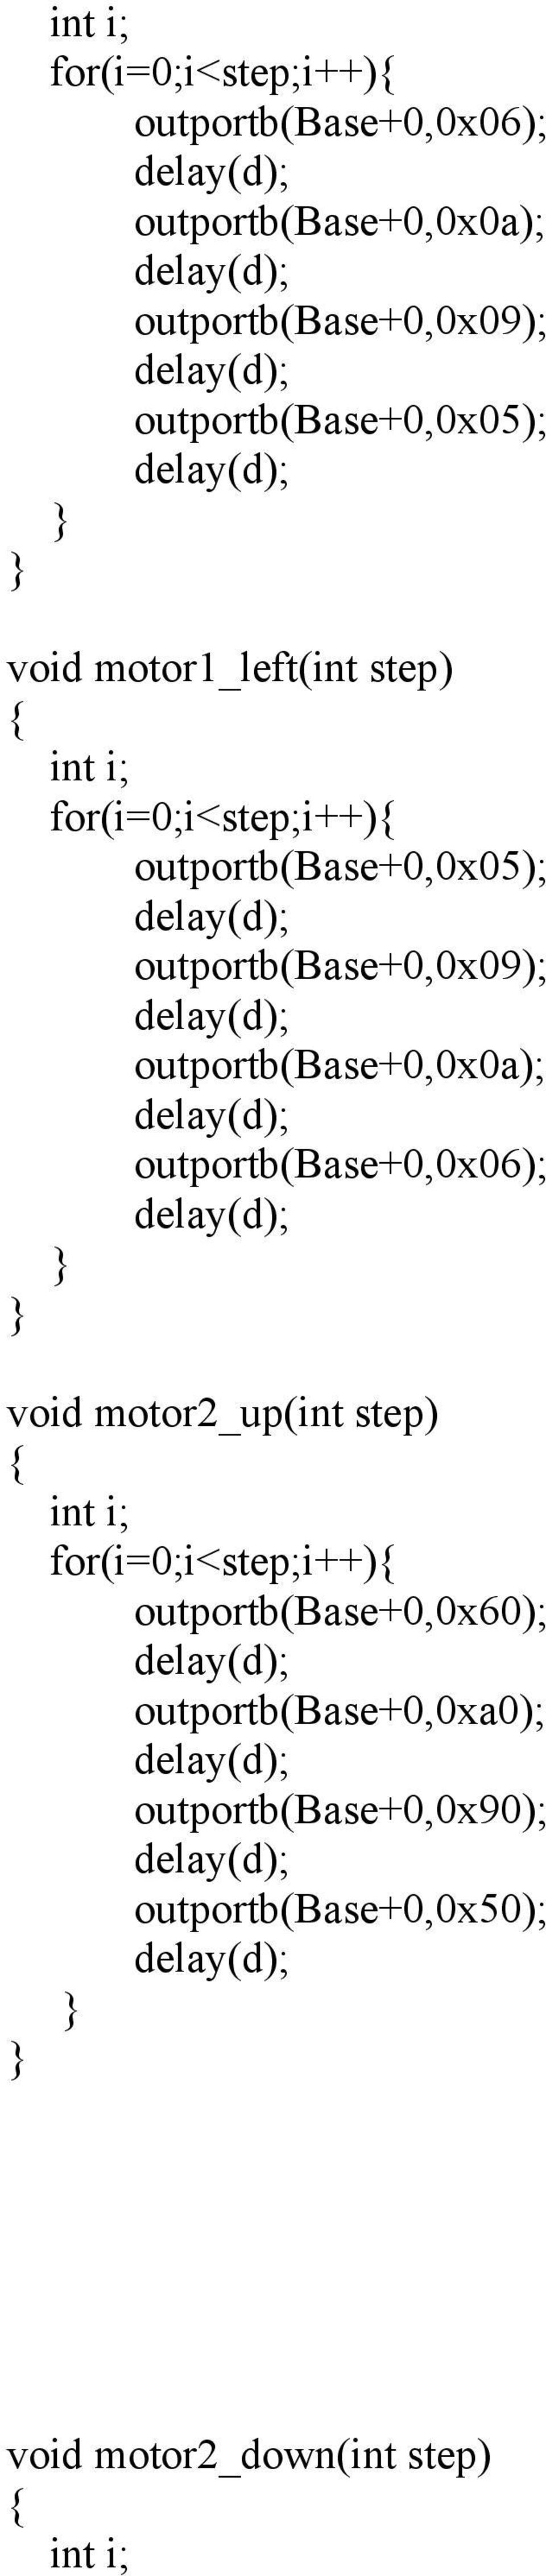 outportb(base+0,0x09); outportb(base+0,0x0a); outportb(base+0,0x06); void motor2_up(int step) int i;